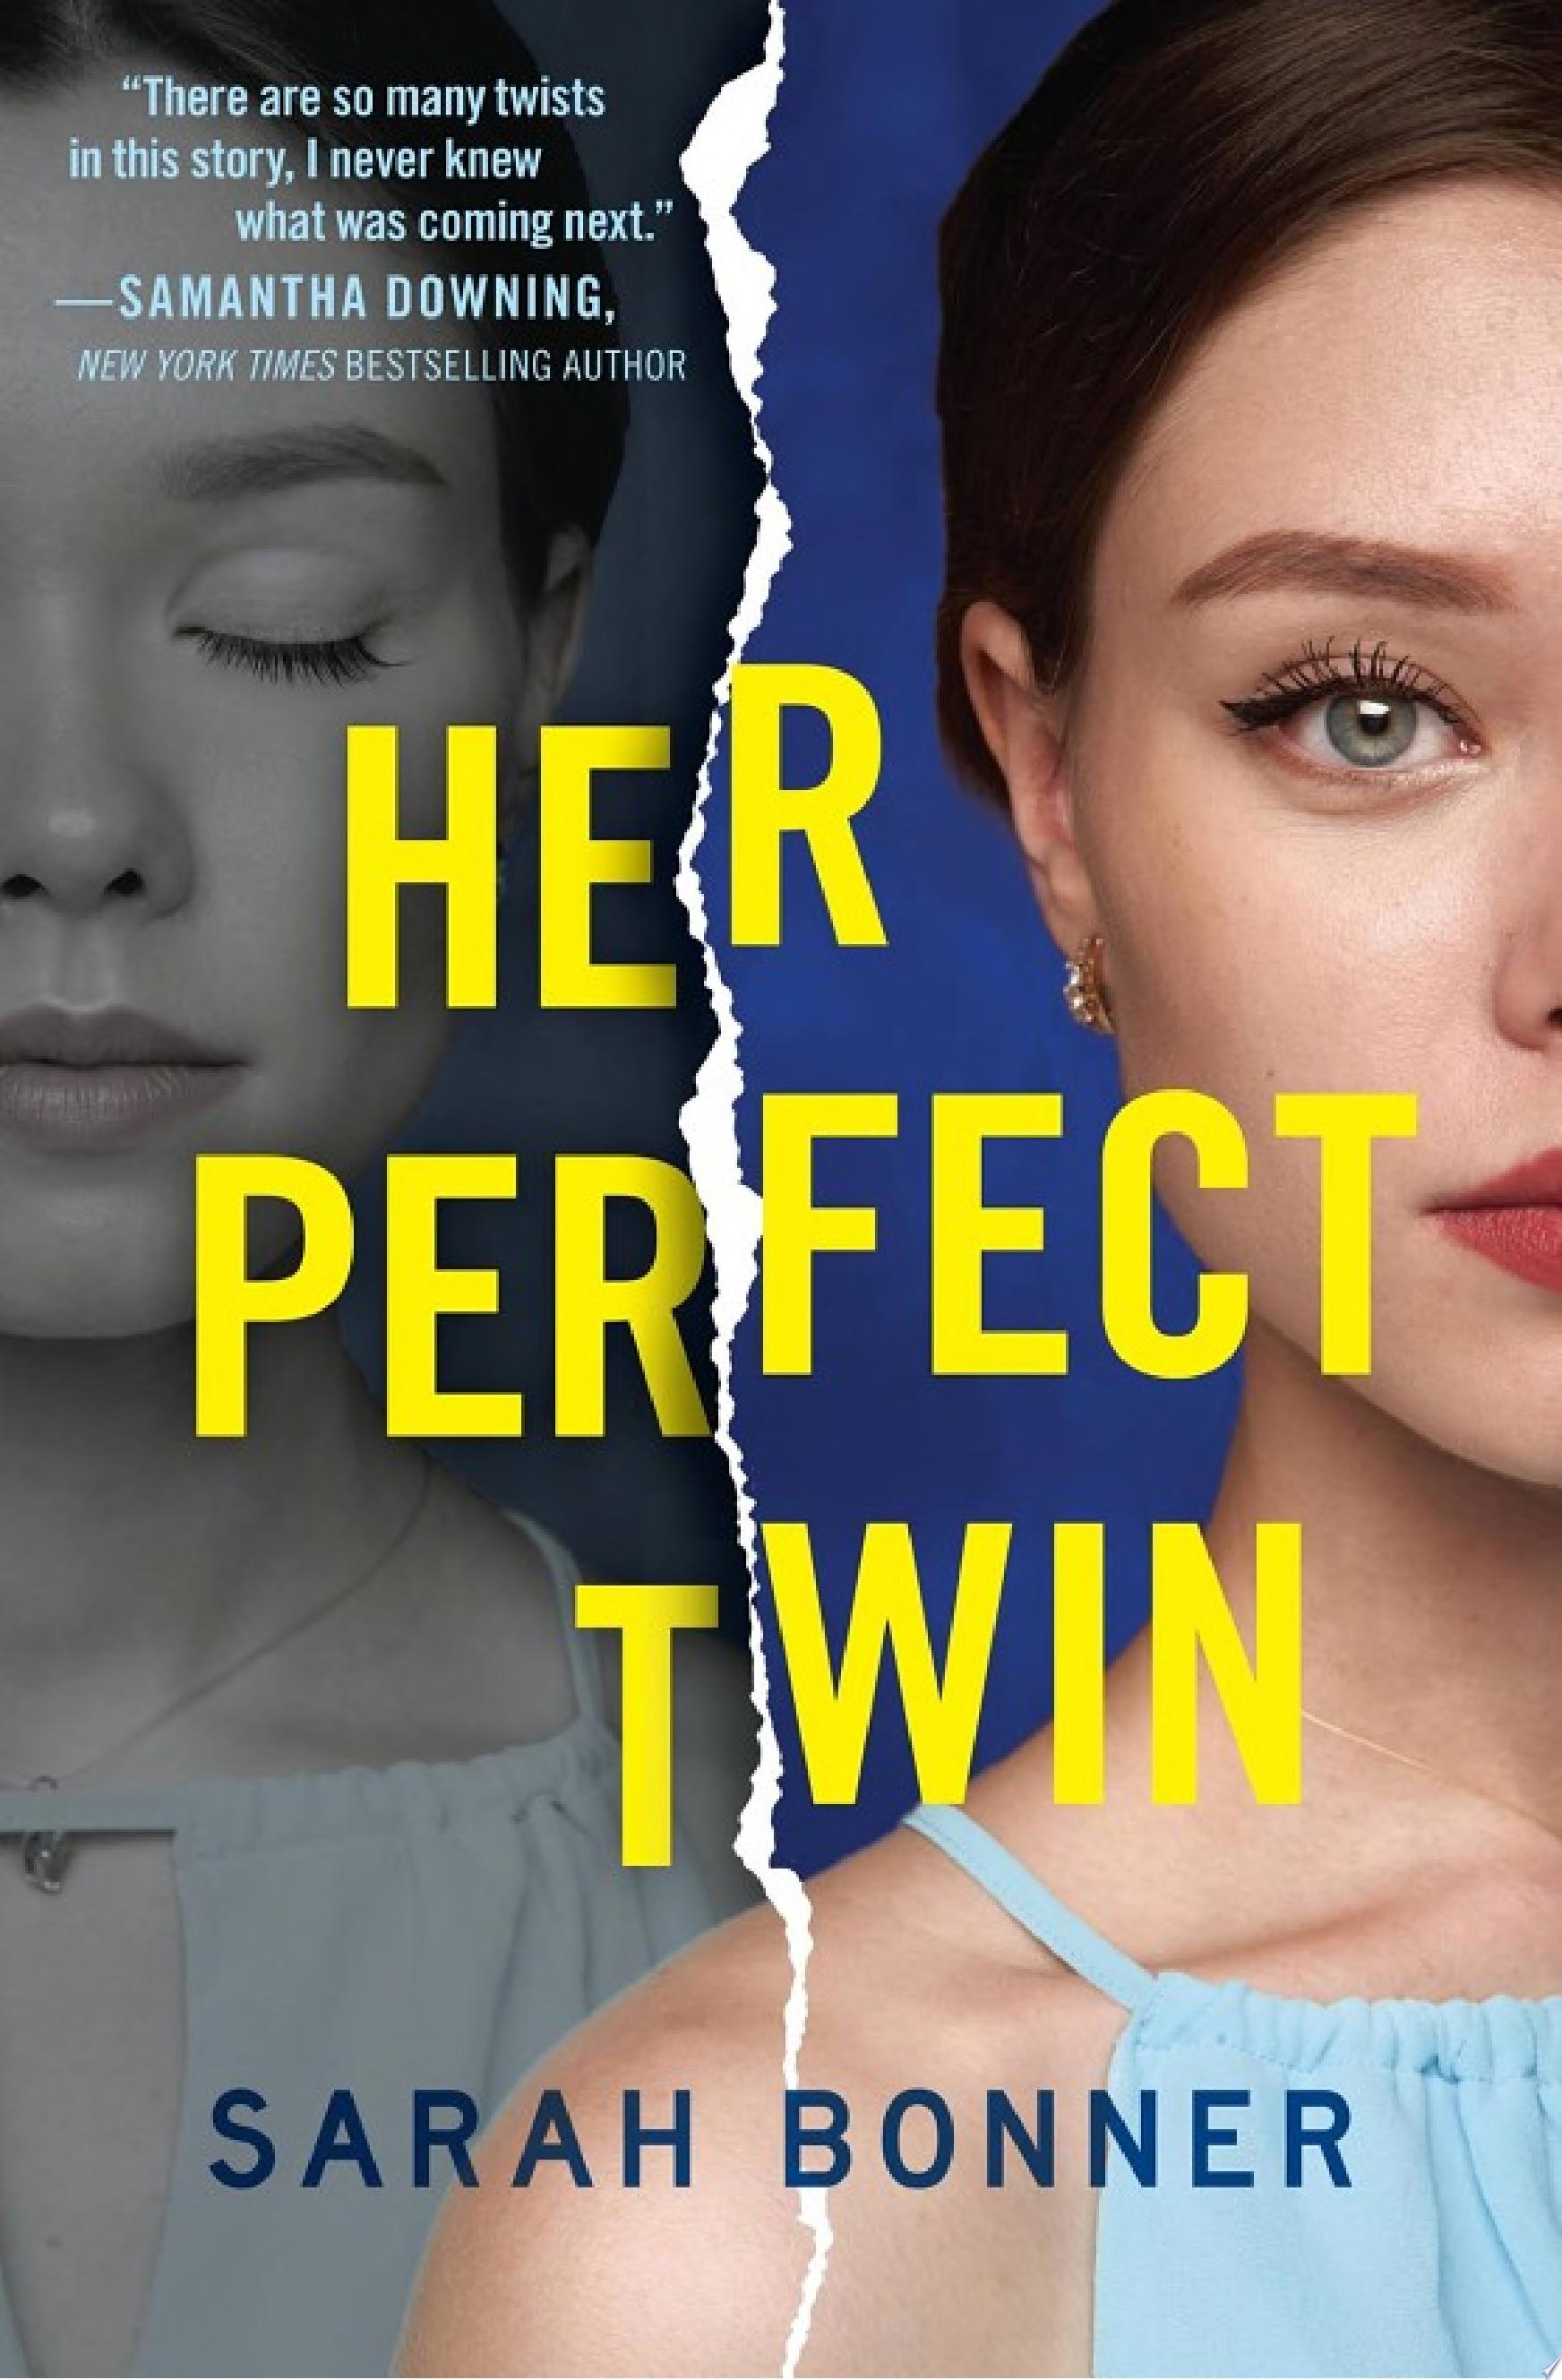 Image for "Her Perfect Twin"